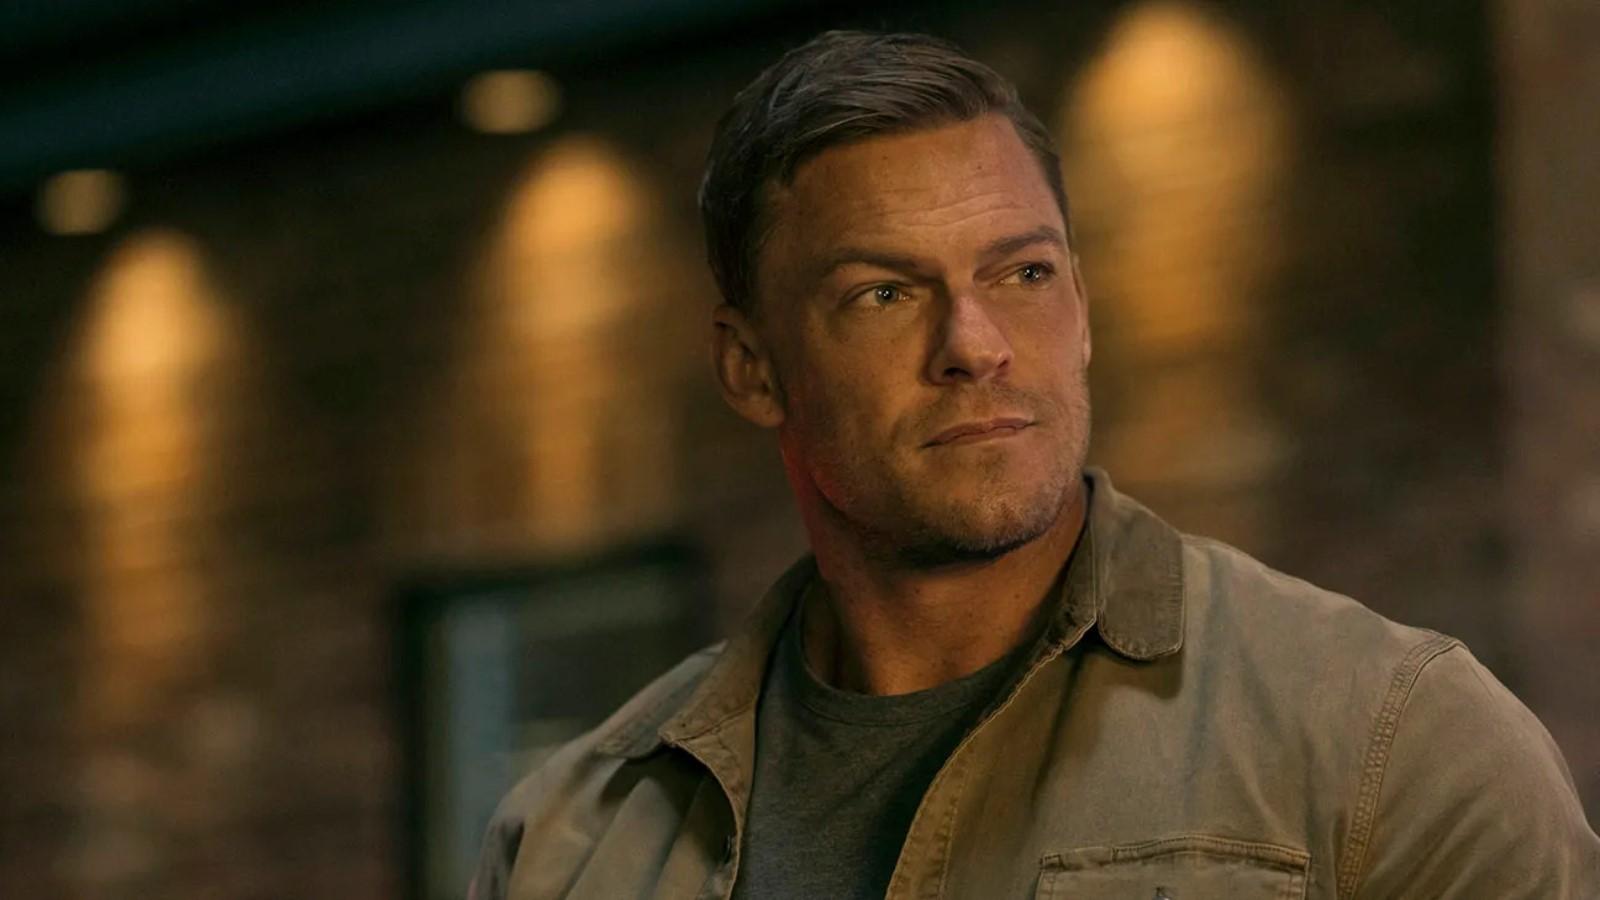 Alan Ritchson as Reacher wearing a jacket and looking off camera